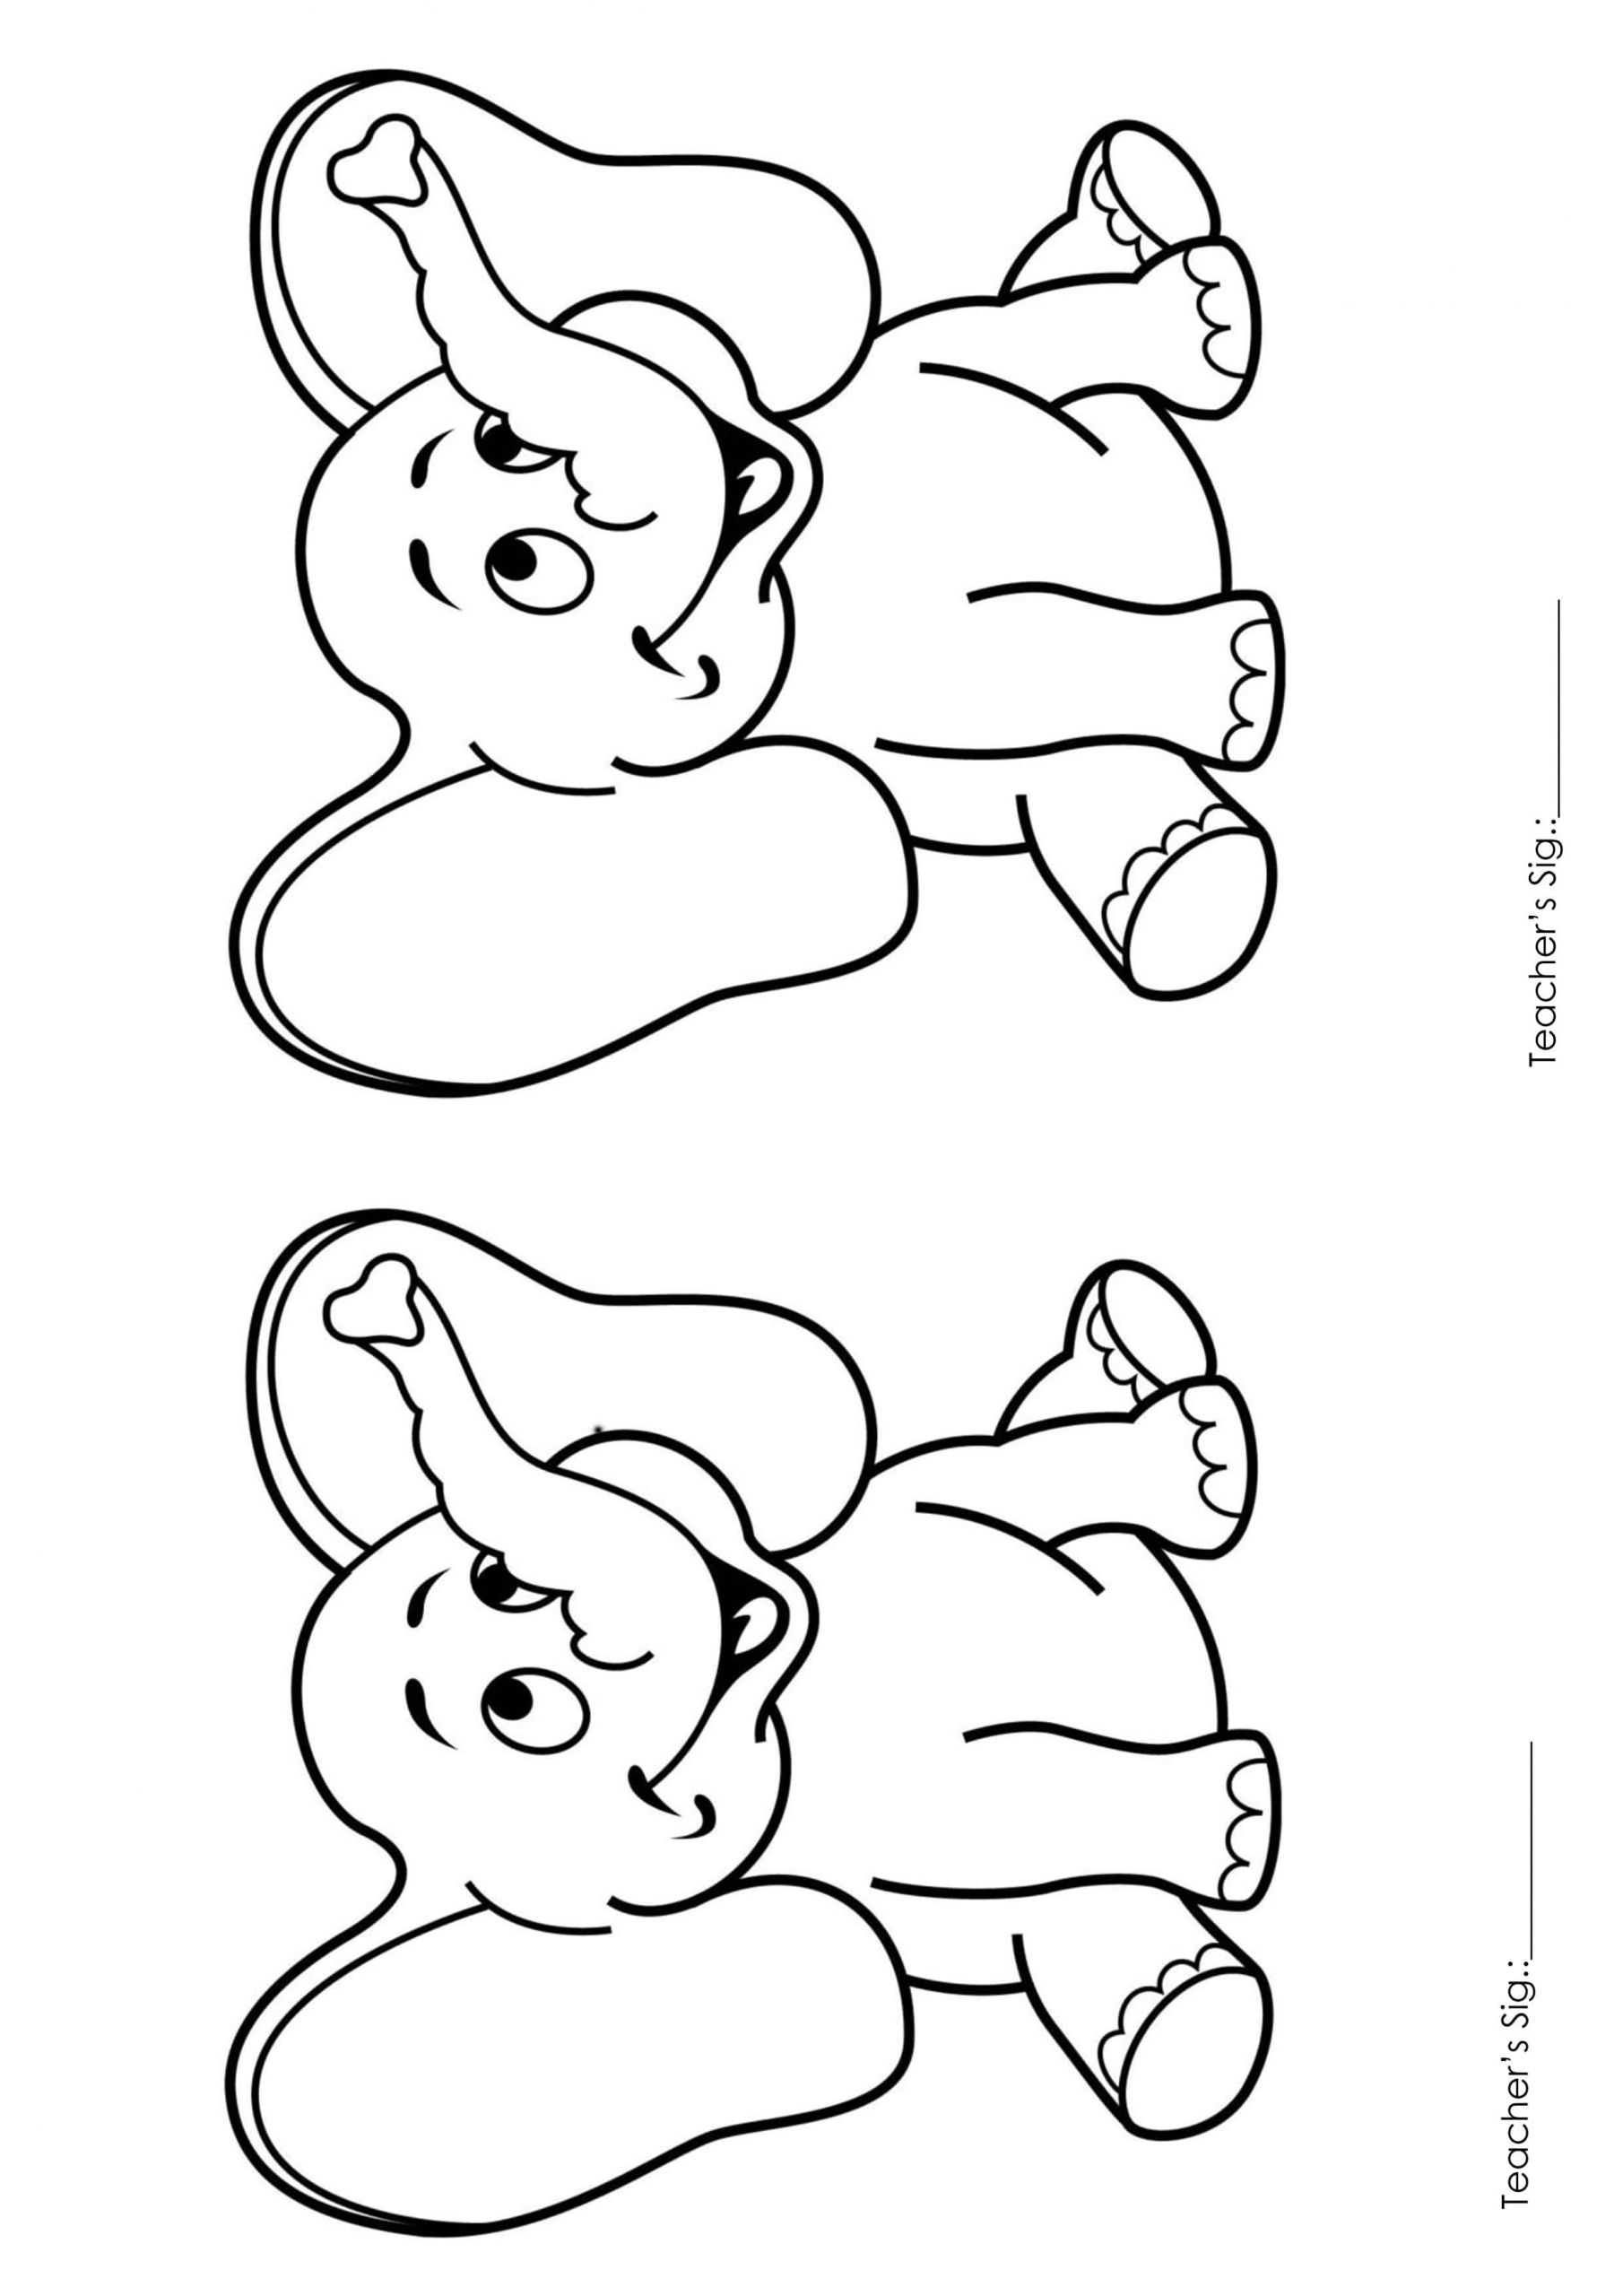 Coloring Pages For Kids Printables
 Printable Coloring Pages for Kids Playgroup A4 Size 1